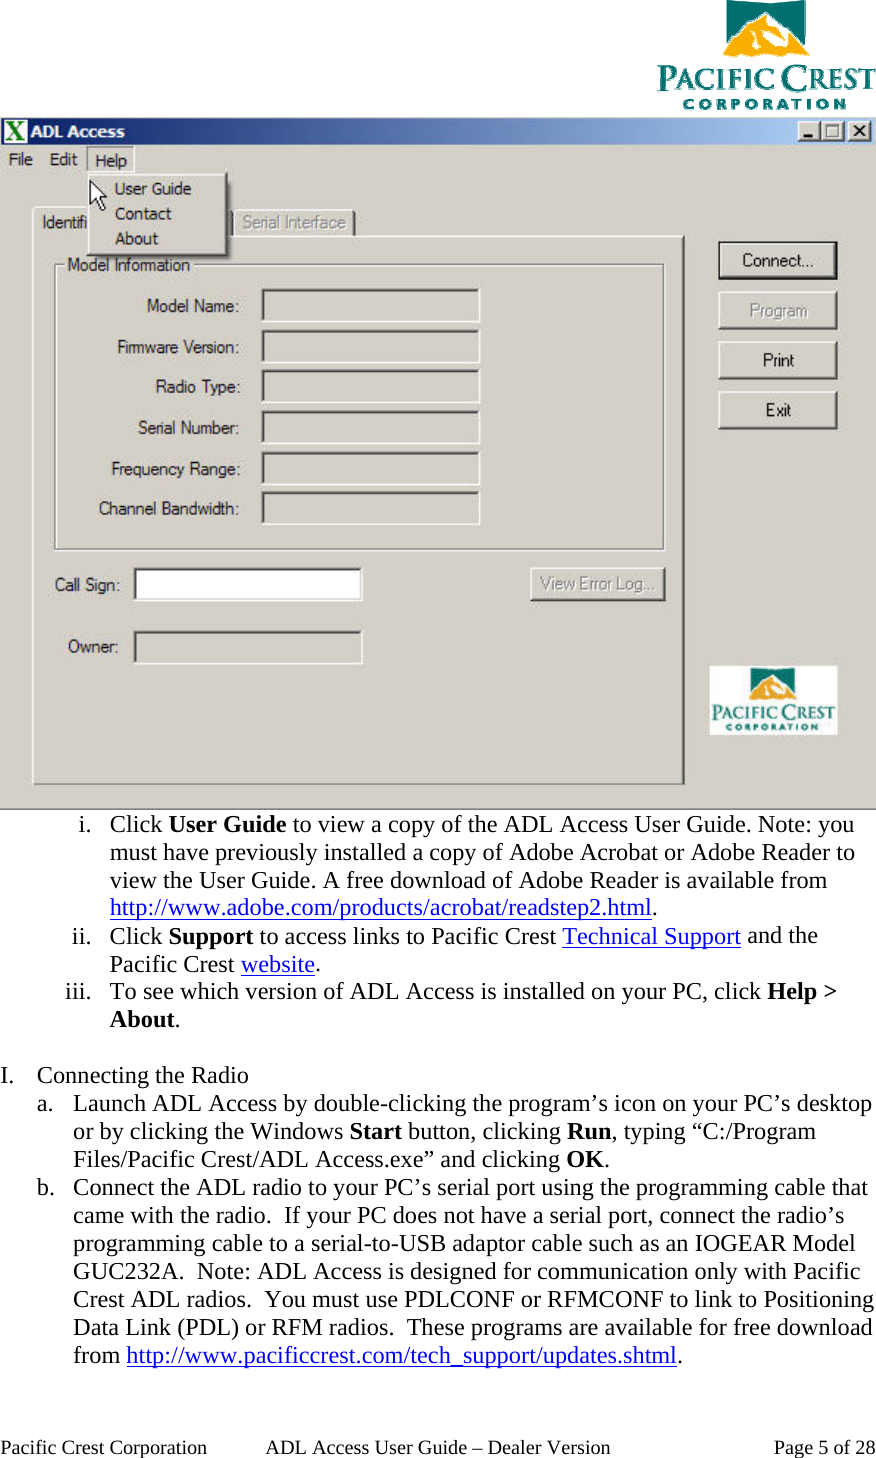  Pacific Crest Corporation  ADL Access User Guide – Dealer Version  Page 5 of 28  i. Click User Guide to view a copy of the ADL Access User Guide. Note: you must have previously installed a copy of Adobe Acrobat or Adobe Reader to view the User Guide. A free download of Adobe Reader is available from http://www.adobe.com/products/acrobat/readstep2.html.  ii. Click Support to access links to Pacific Crest Technical Support and the Pacific Crest website. iii. To see which version of ADL Access is installed on your PC, click Help &gt; About.  I. Connecting the Radio a. Launch ADL Access by double-clicking the program’s icon on your PC’s desktop or by clicking the Windows Start button, clicking Run, typing “C:/Program Files/Pacific Crest/ADL Access.exe” and clicking OK. b. Connect the ADL radio to your PC’s serial port using the programming cable that came with the radio.  If your PC does not have a serial port, connect the radio’s programming cable to a serial-to-USB adaptor cable such as an IOGEAR Model GUC232A.  Note: ADL Access is designed for communication only with Pacific Crest ADL radios.  You must use PDLCONF or RFMCONF to link to Positioning Data Link (PDL) or RFM radios.  These programs are available for free download from http://www.pacificcrest.com/tech_support/updates.shtml. 